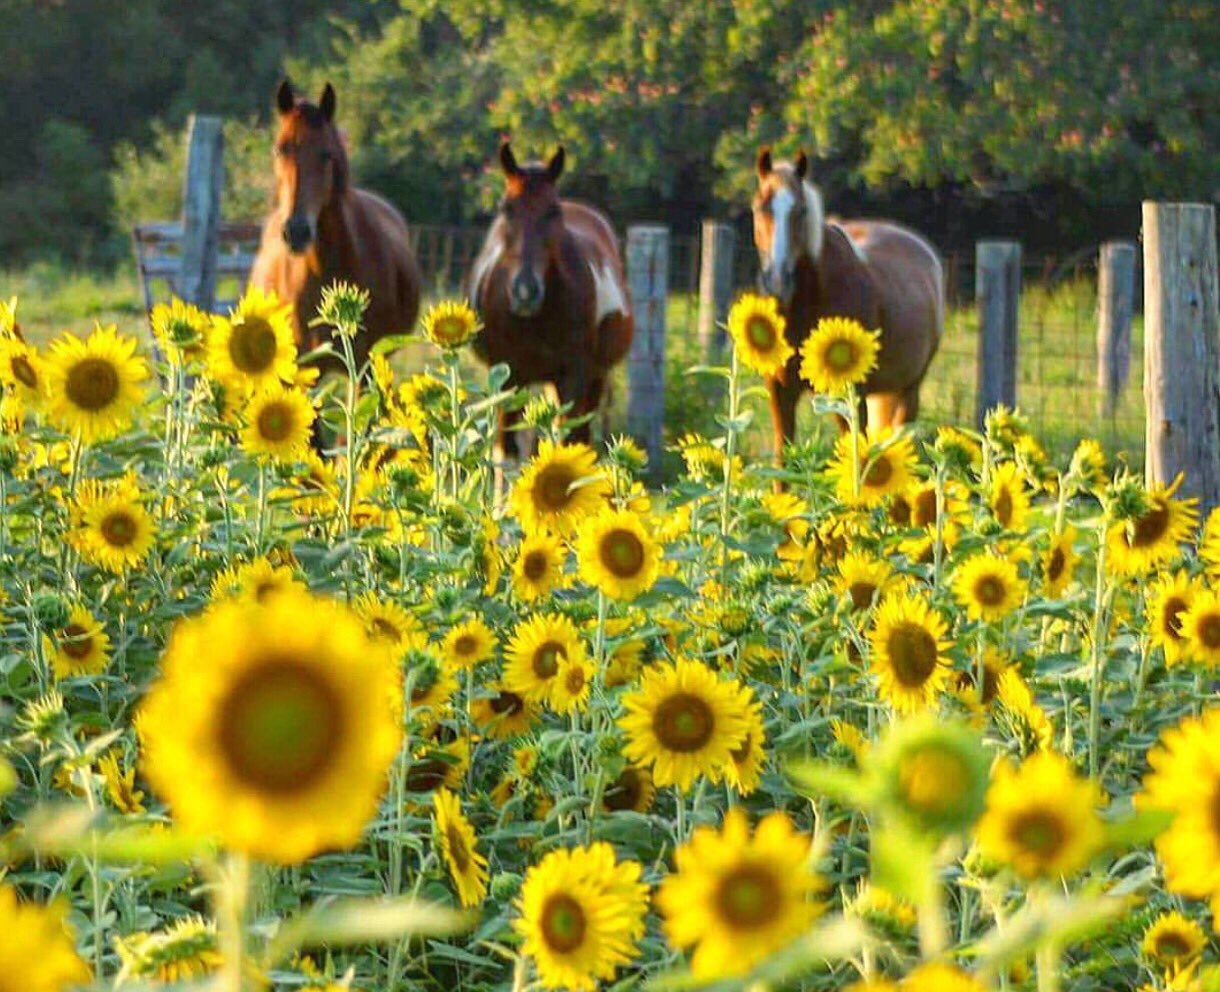 Kentucky Tourism on Twitter: "Sunflowers and horses in Science Hill. Photo by Carrie Mofield. #travelKY #kentucky https://t.co/yiBF13orUx" / Twitter